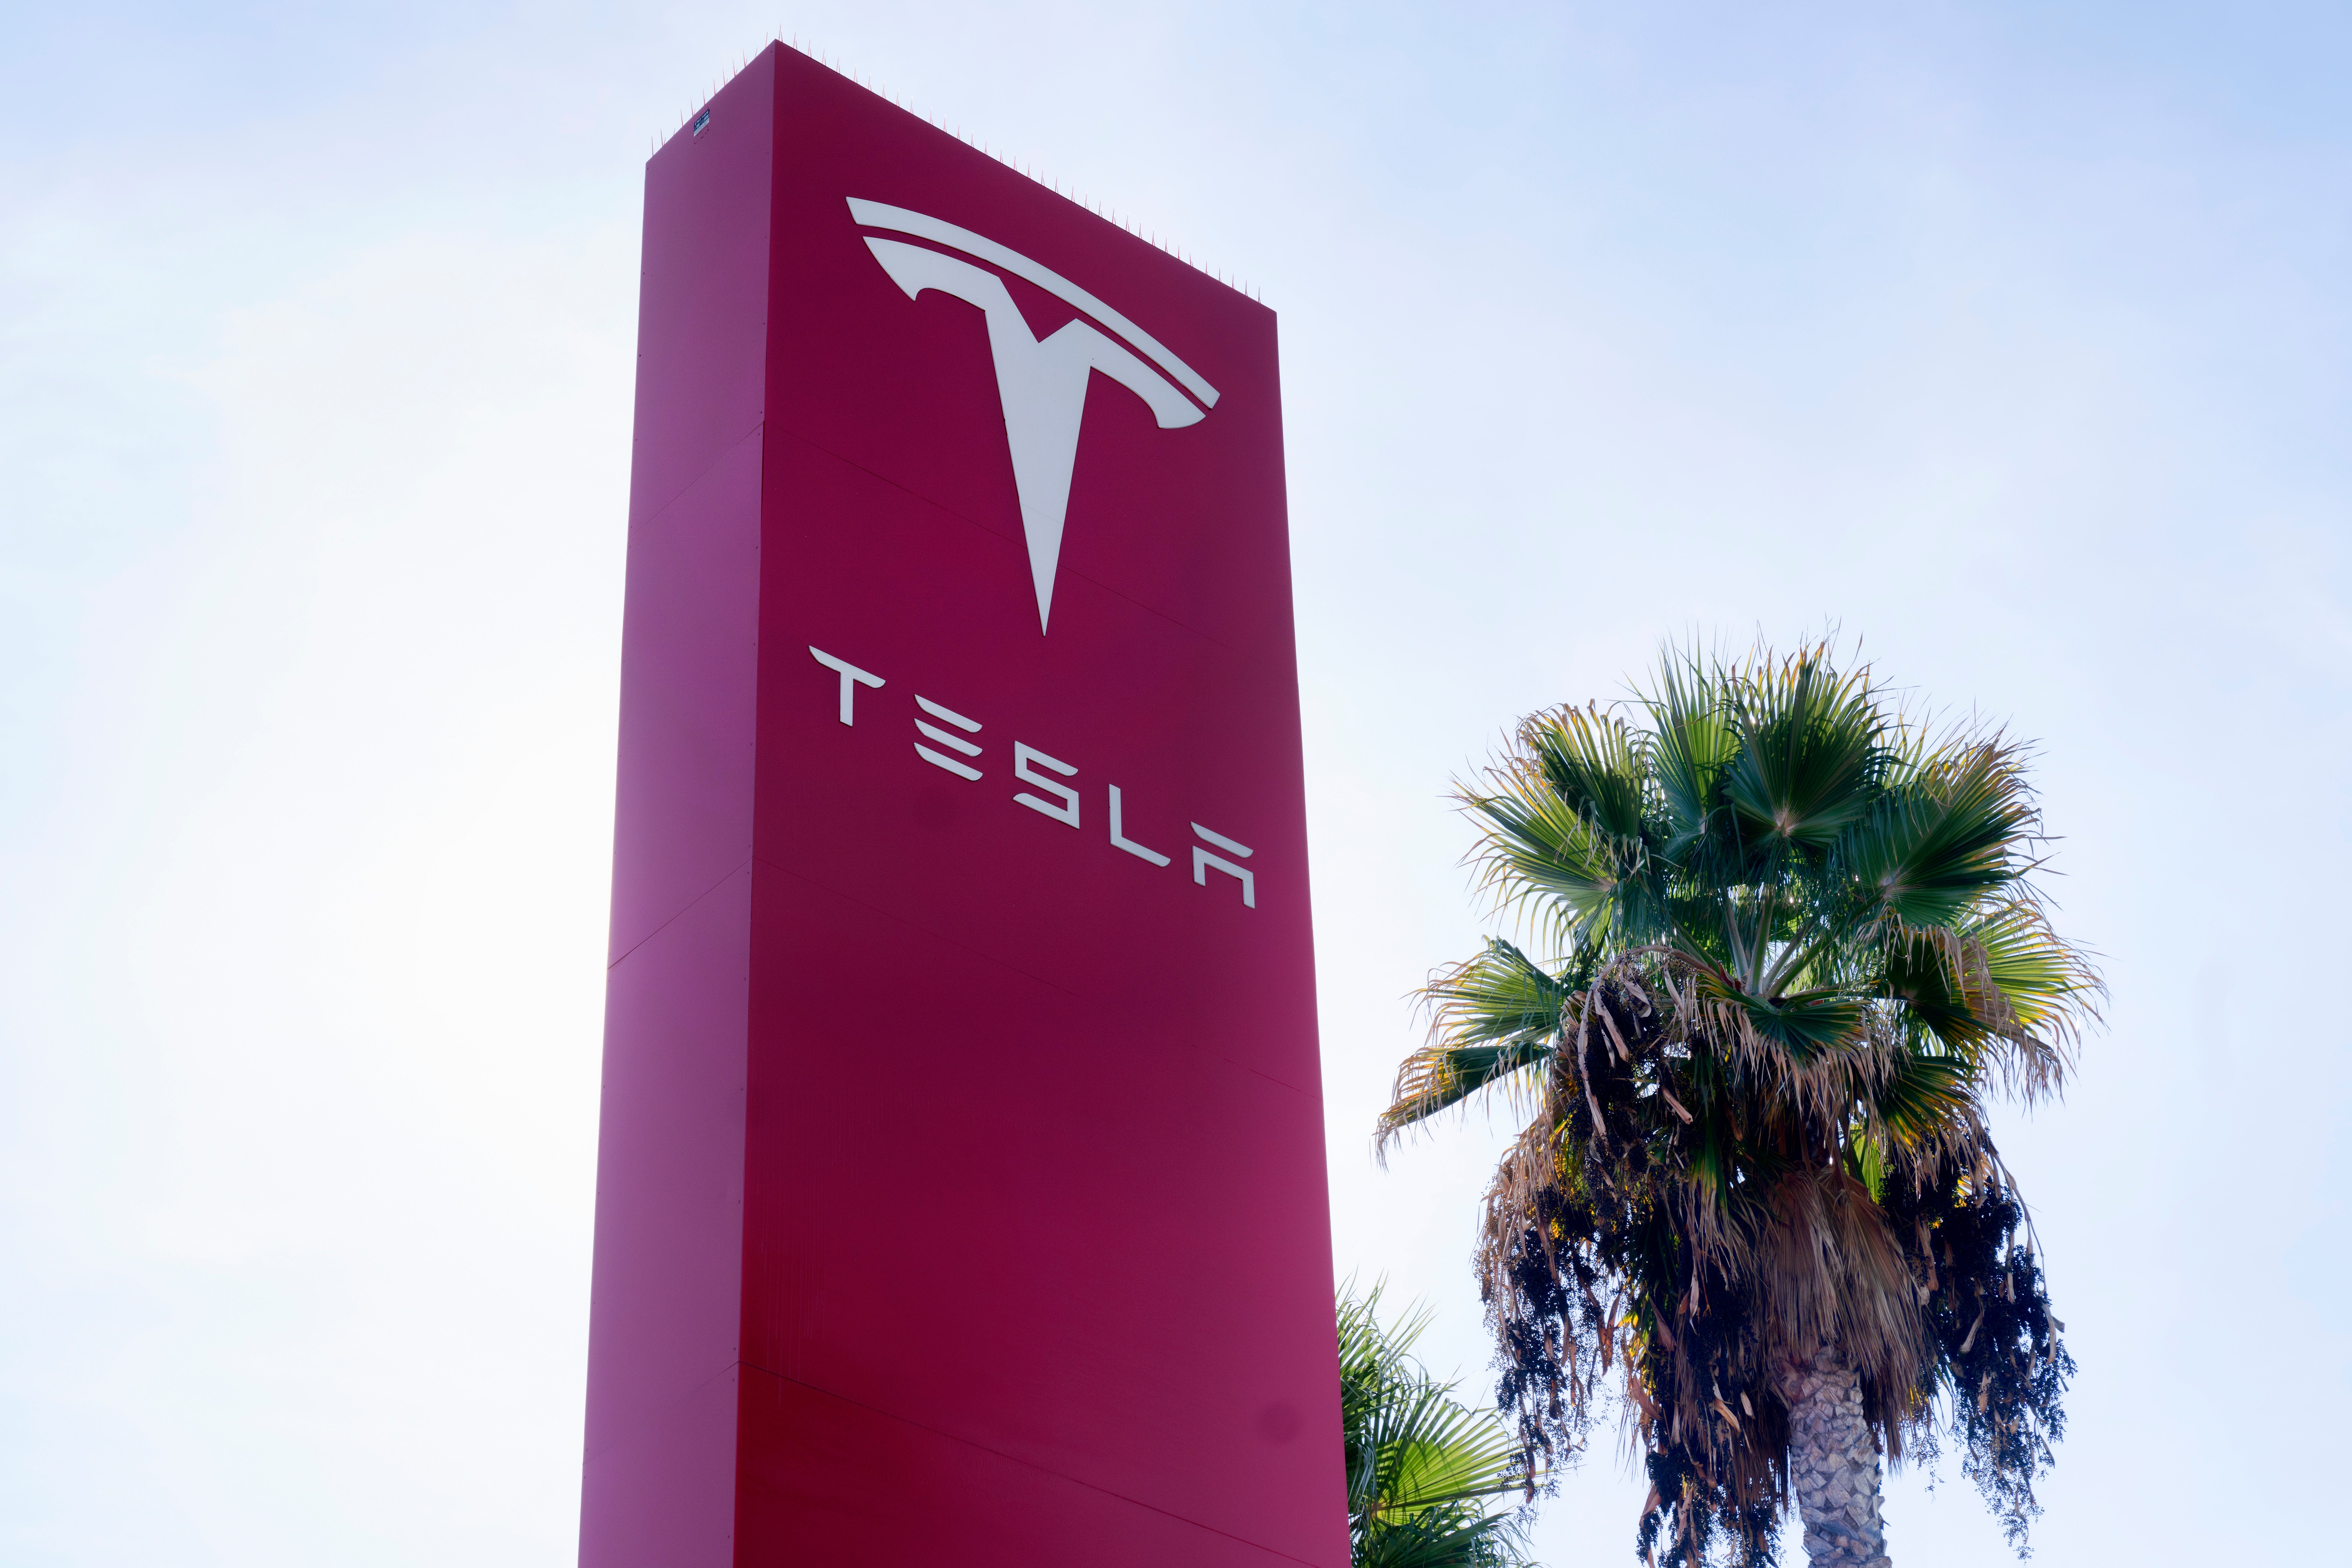 Tesla said the Indian battery-maker had continued to use the brand name ‘Tesla Pwer’ to promote its products, despite a cease-and-desist notice sent in April 2022